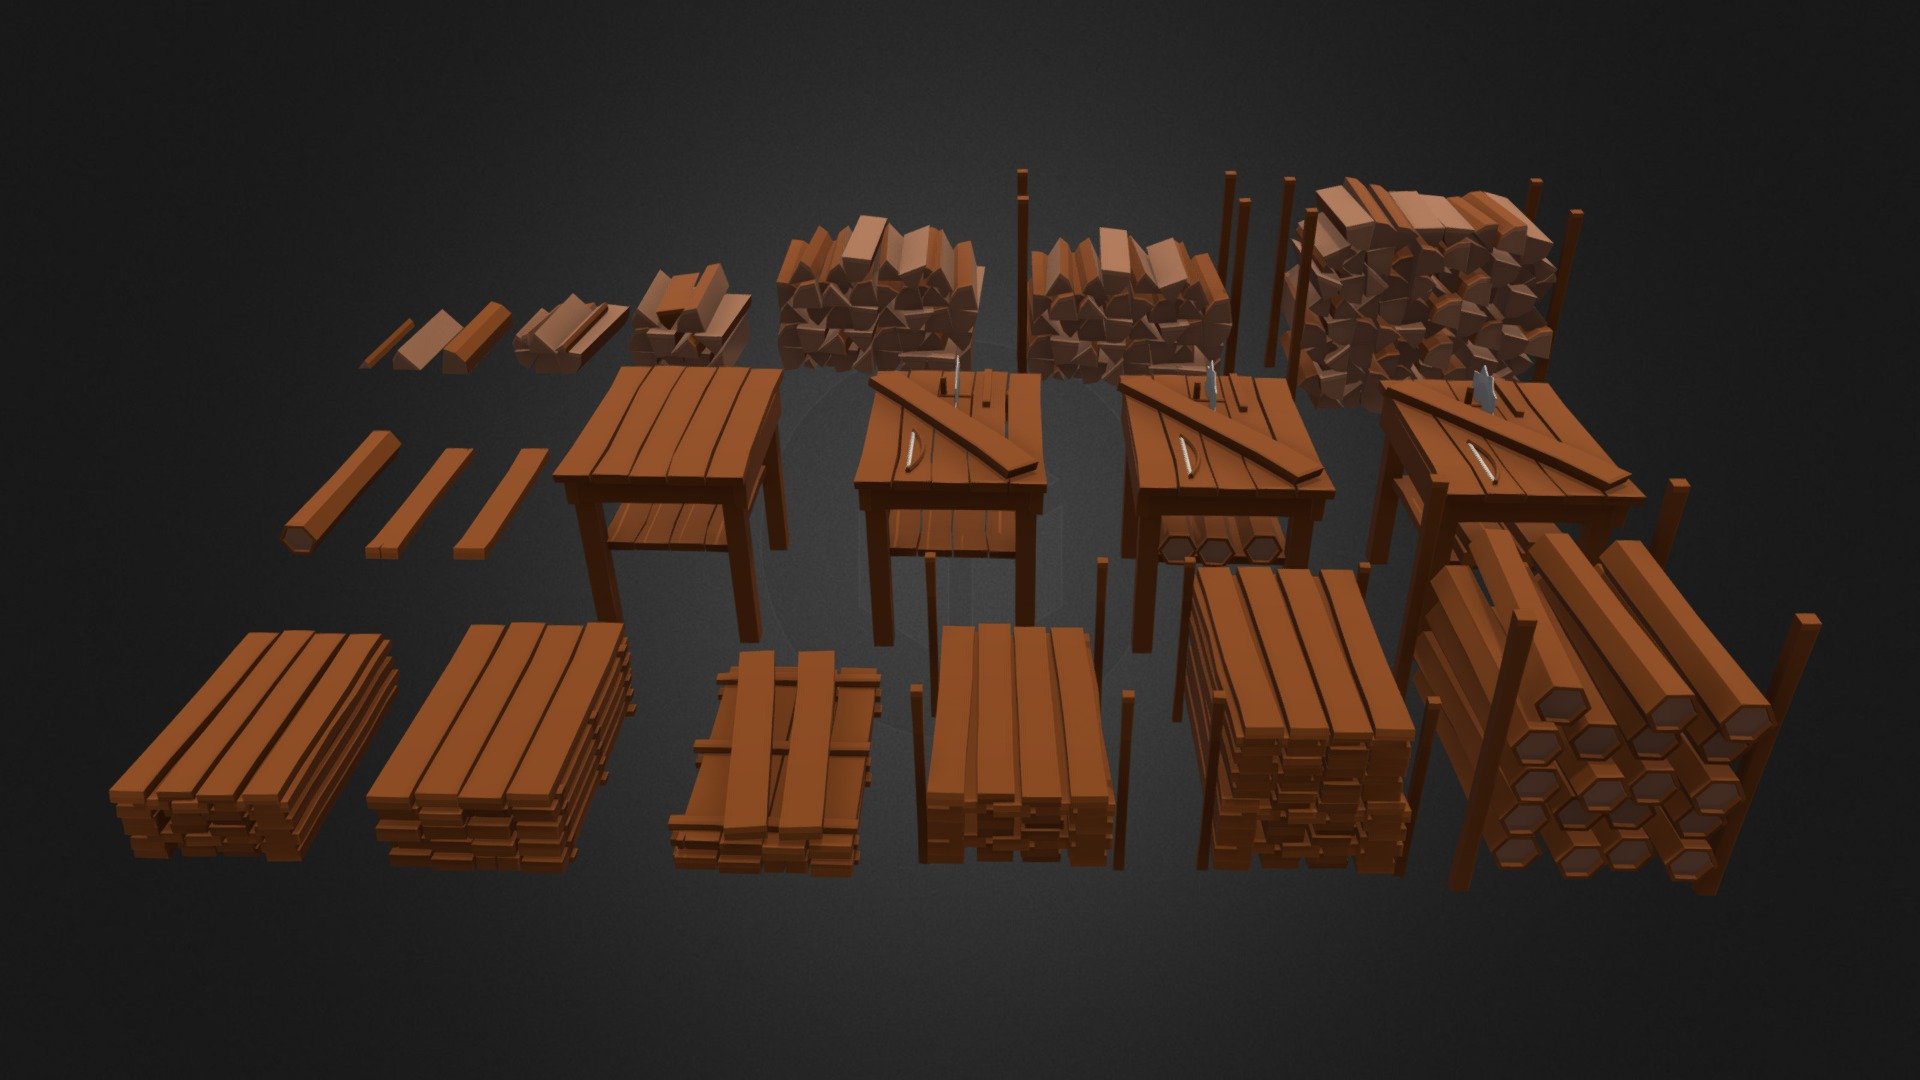 This is a Lowpoly pack of wooden props / sawmill 

[Contents]

Total Models x21
x1 wooden log
x2 planks
x3 split logs
x5 split log piles
x5 plank piles
x1 wooden log pile
x1 bench
x3 sawmill benches

[Colours]

3 colours of wood, grey metal

Original Models / Lowpoly Models / Game ready Props

SimplePolygon Discord
https://discord.gg/8WSpWnGH4b

[Licence] Not to resell model, can sell commercially in end project/game

Credit myself, SimplePolygon

If you have any further questions I will be happy to answer 3d model